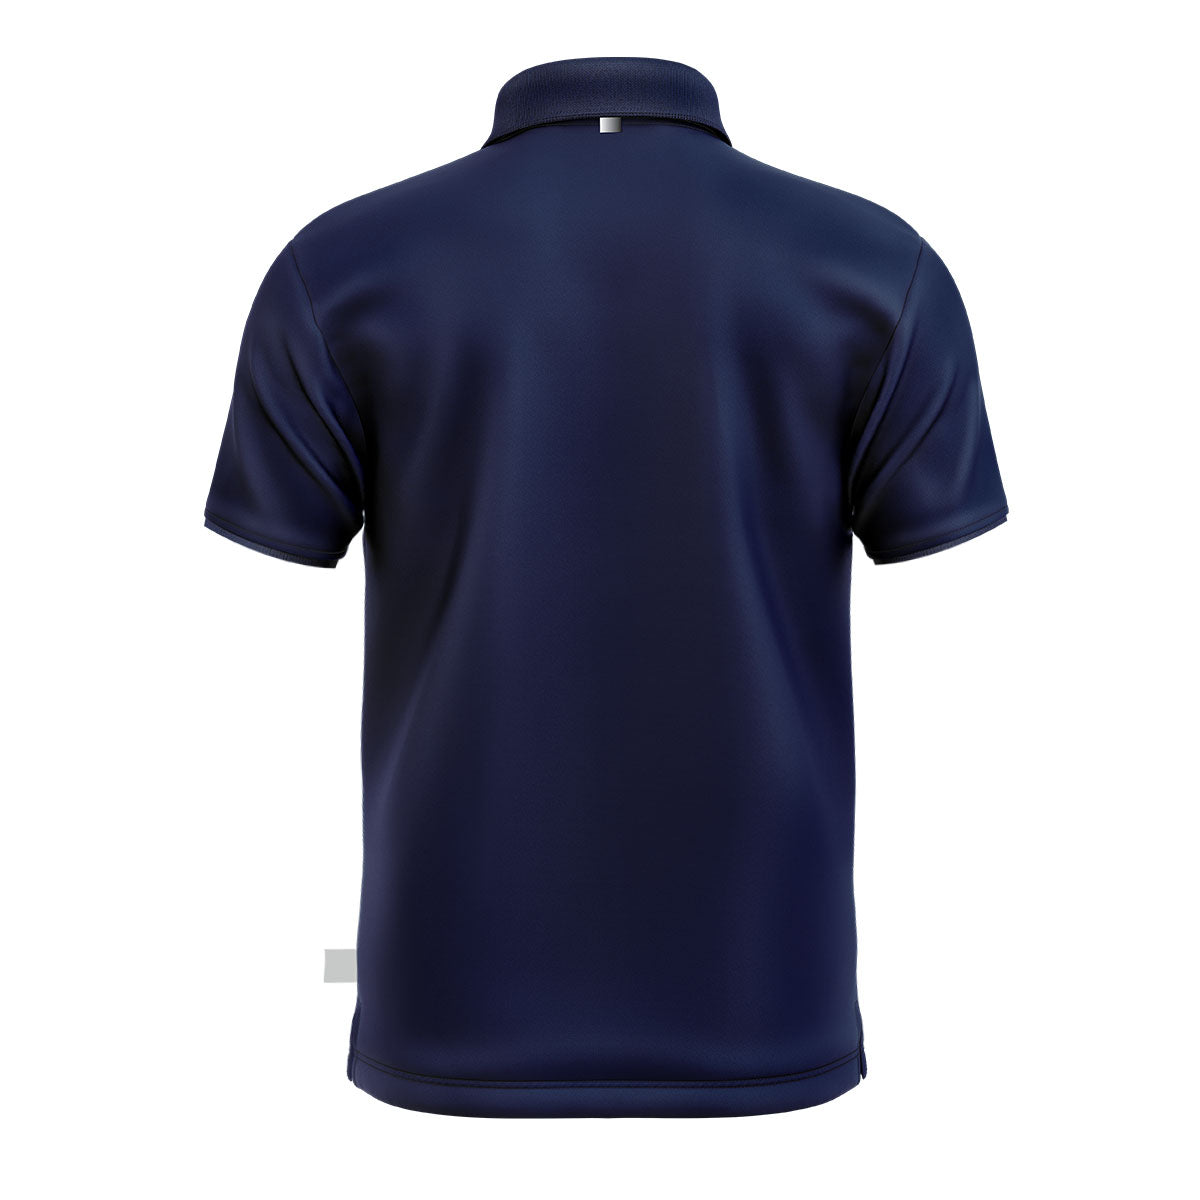 Cromwell AFC Mens Polo